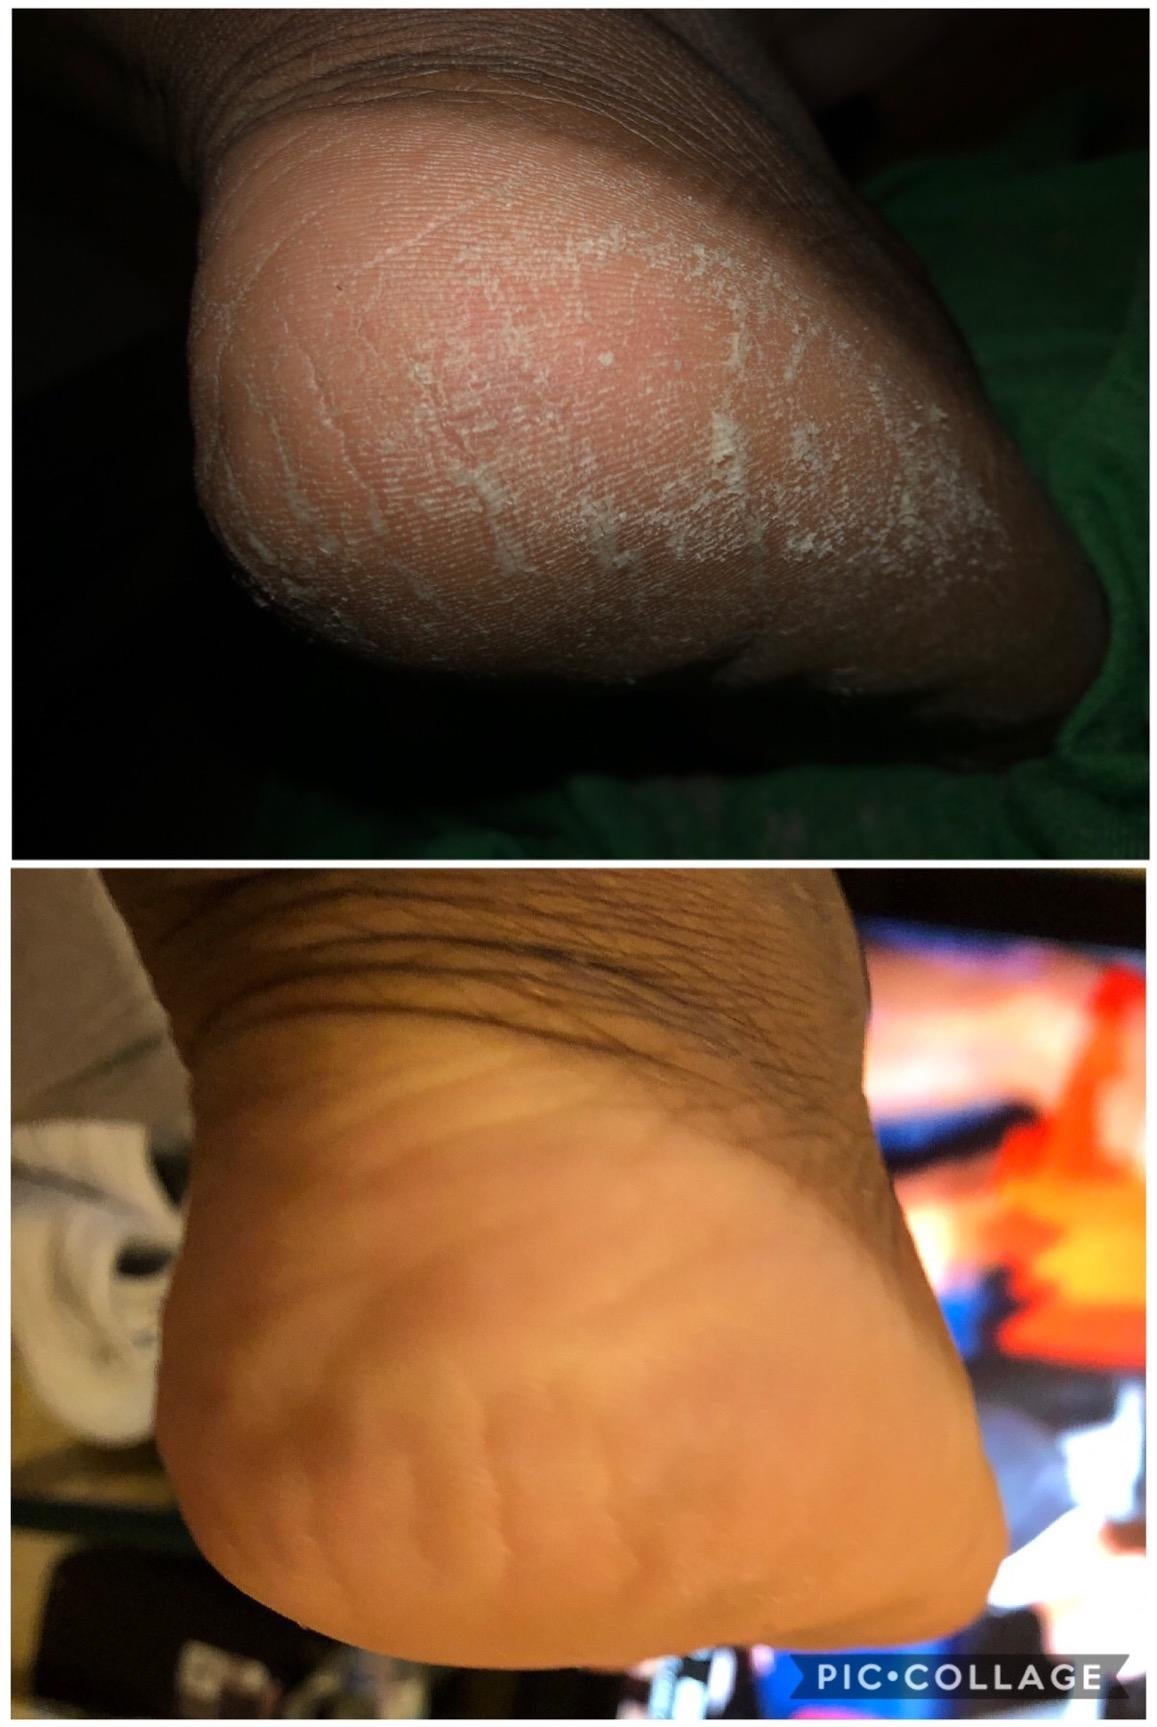 on top: heel covered in dry skin. on bottom: same heel without cracking and dry spots after using callus remover gel